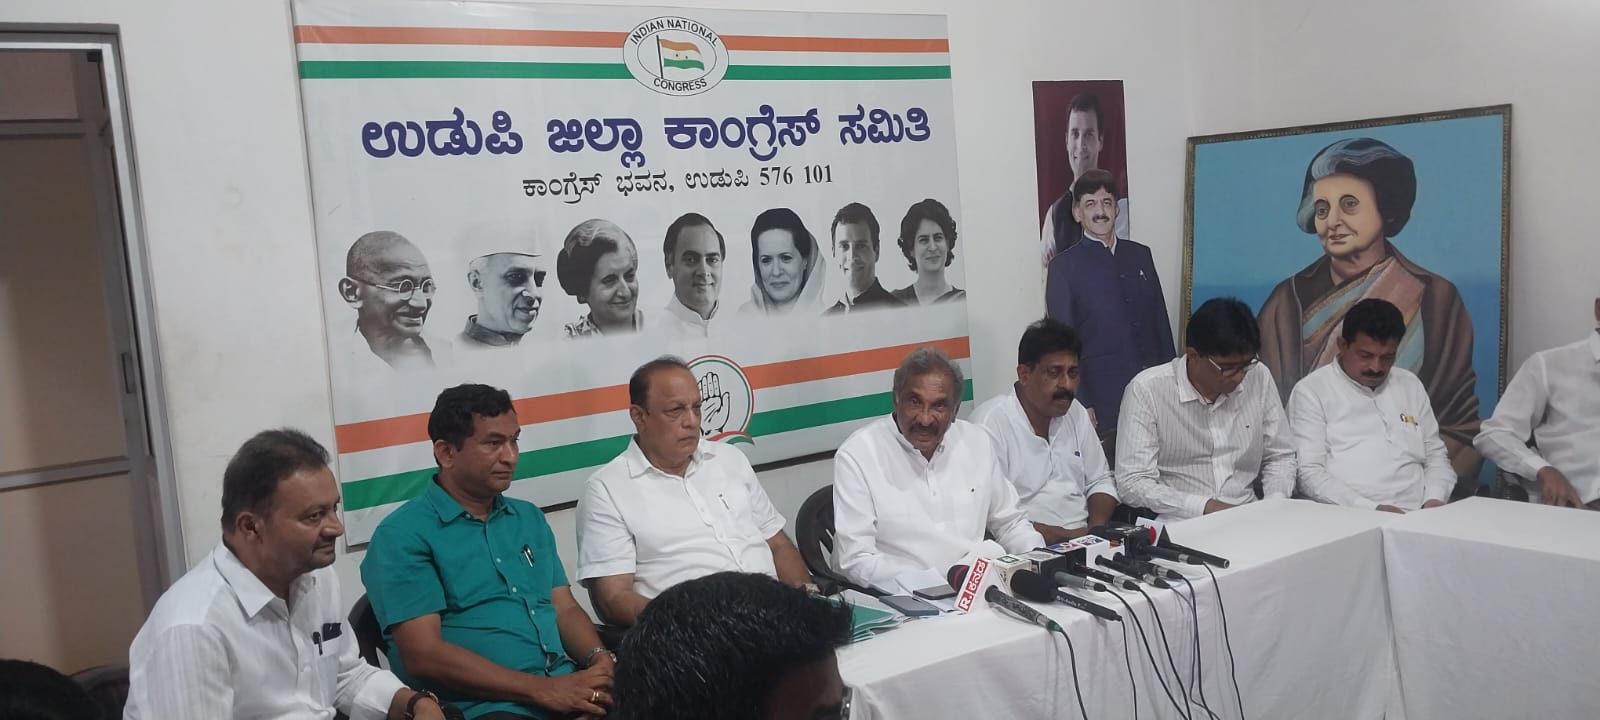 The Union government not responded to the state during the worst drought situation in the state : K J George, Power Minister, Government of Karnataka